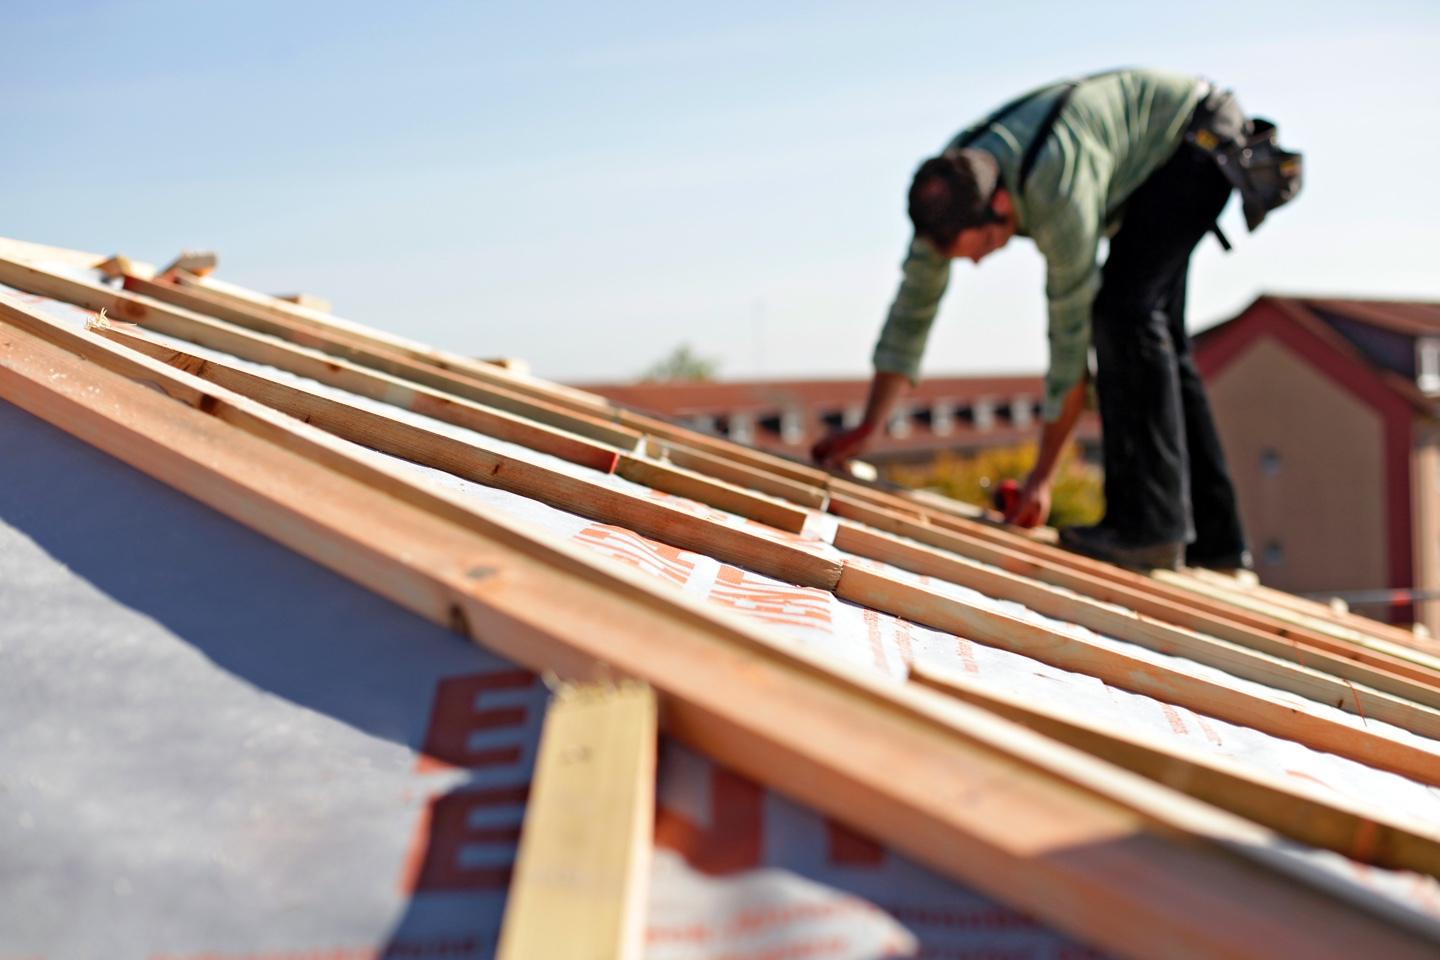 Time Well Spent: How Long Does It Take to Install a New Roof?